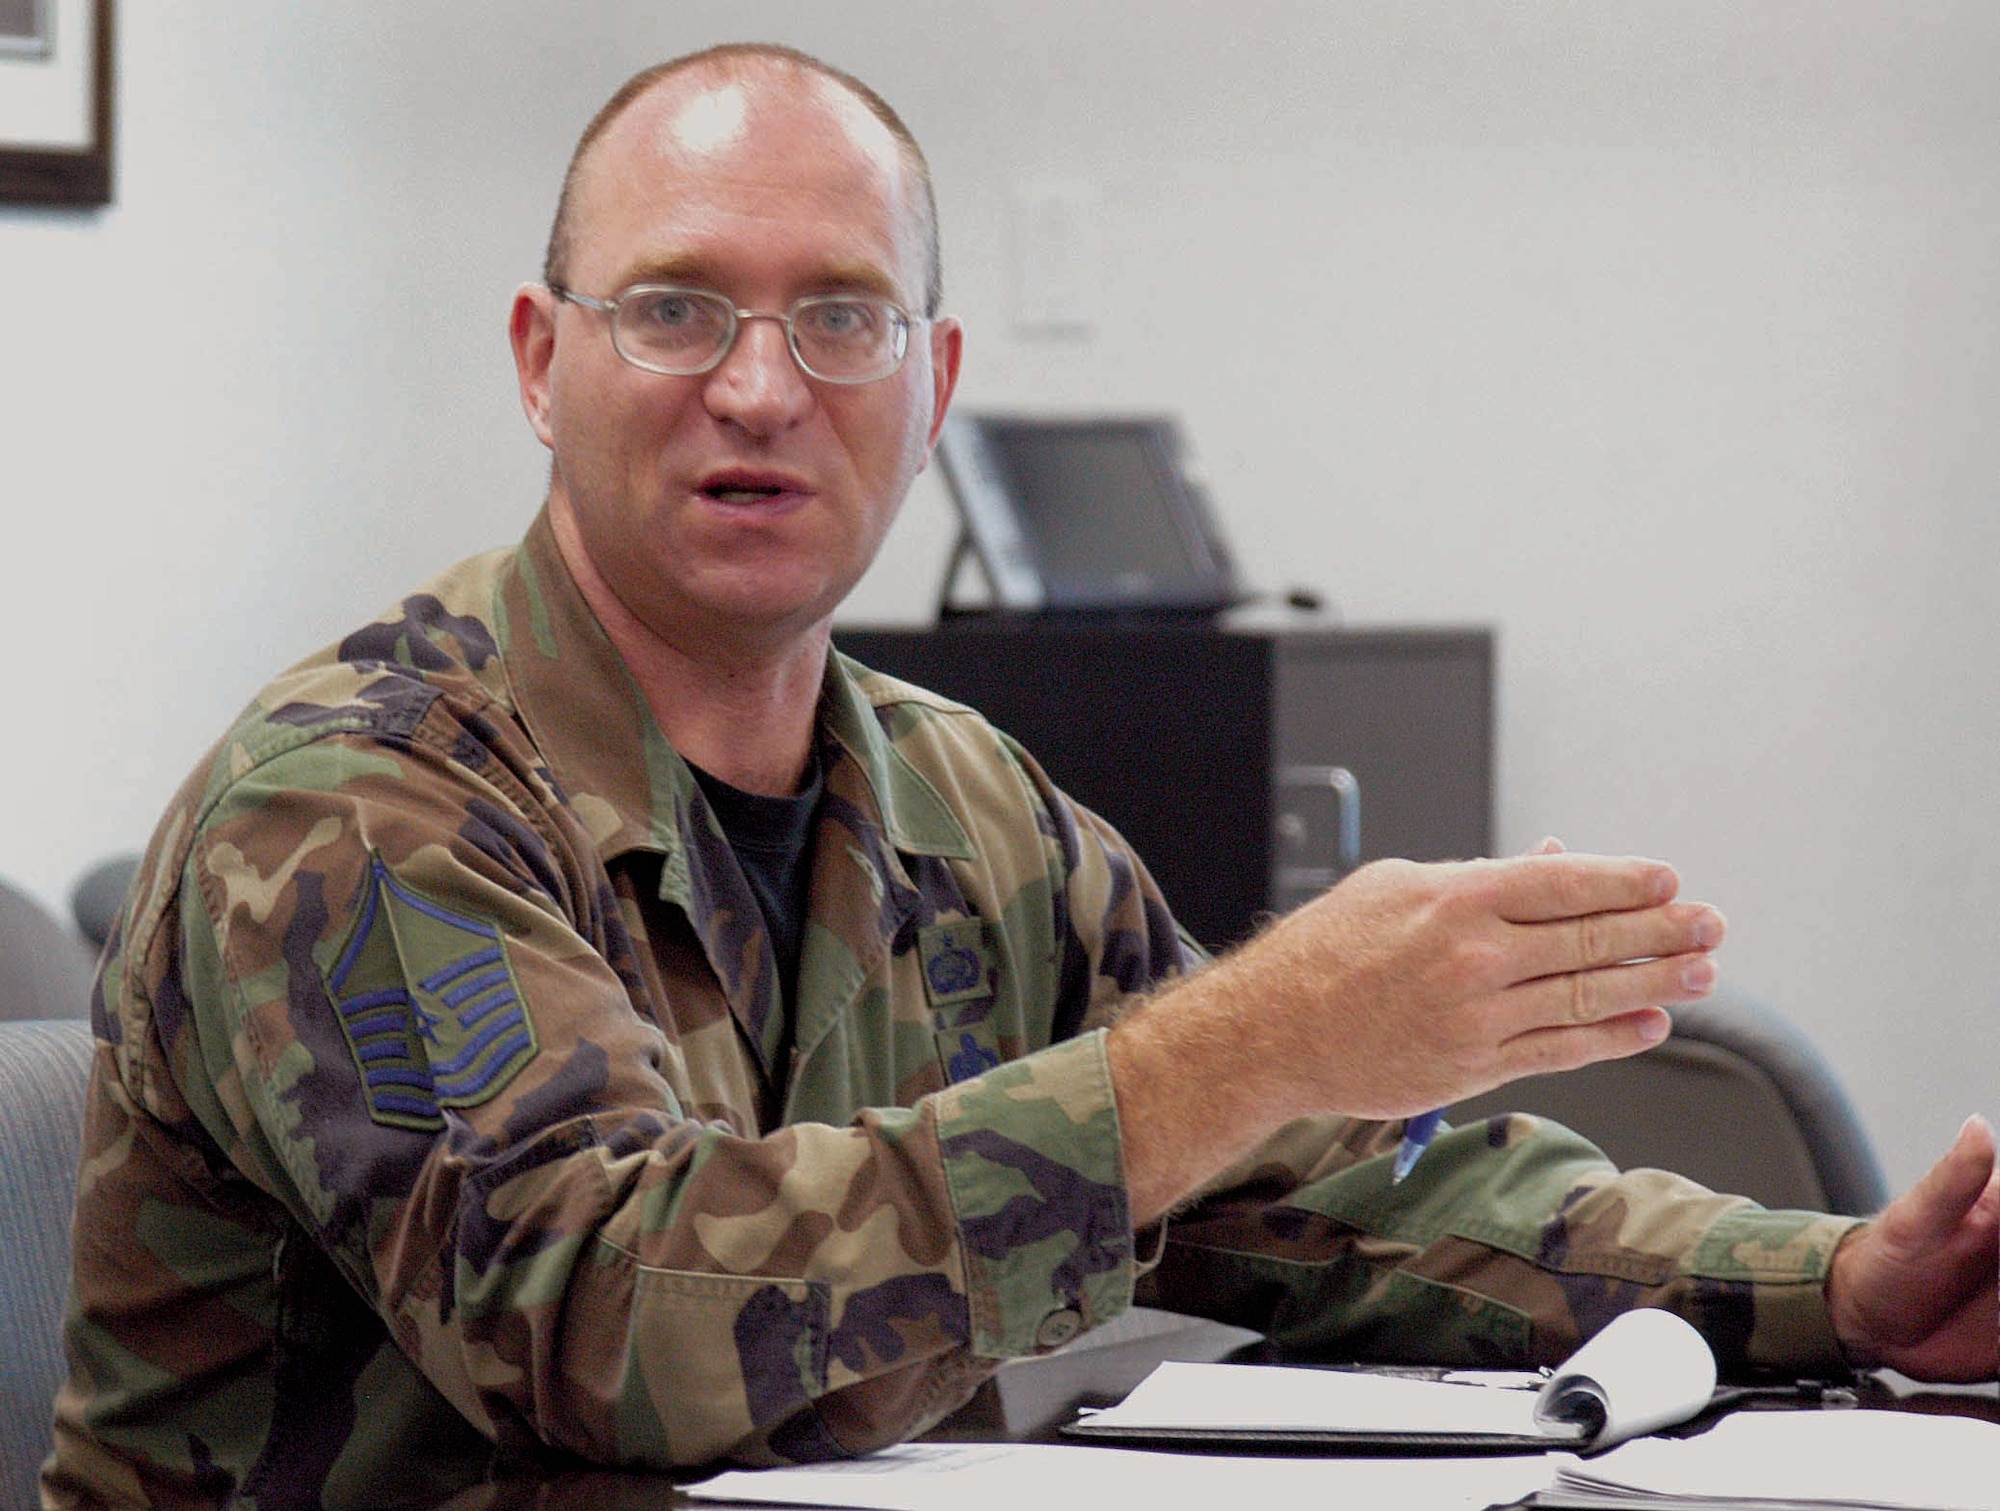 Master Sgt. Daniel Davies, superintendent and first sergeant of the 5th Manpower Requirements Squadron, discusses personnel issues during a recent meeting. (Air Force photo by Margo Wright)
